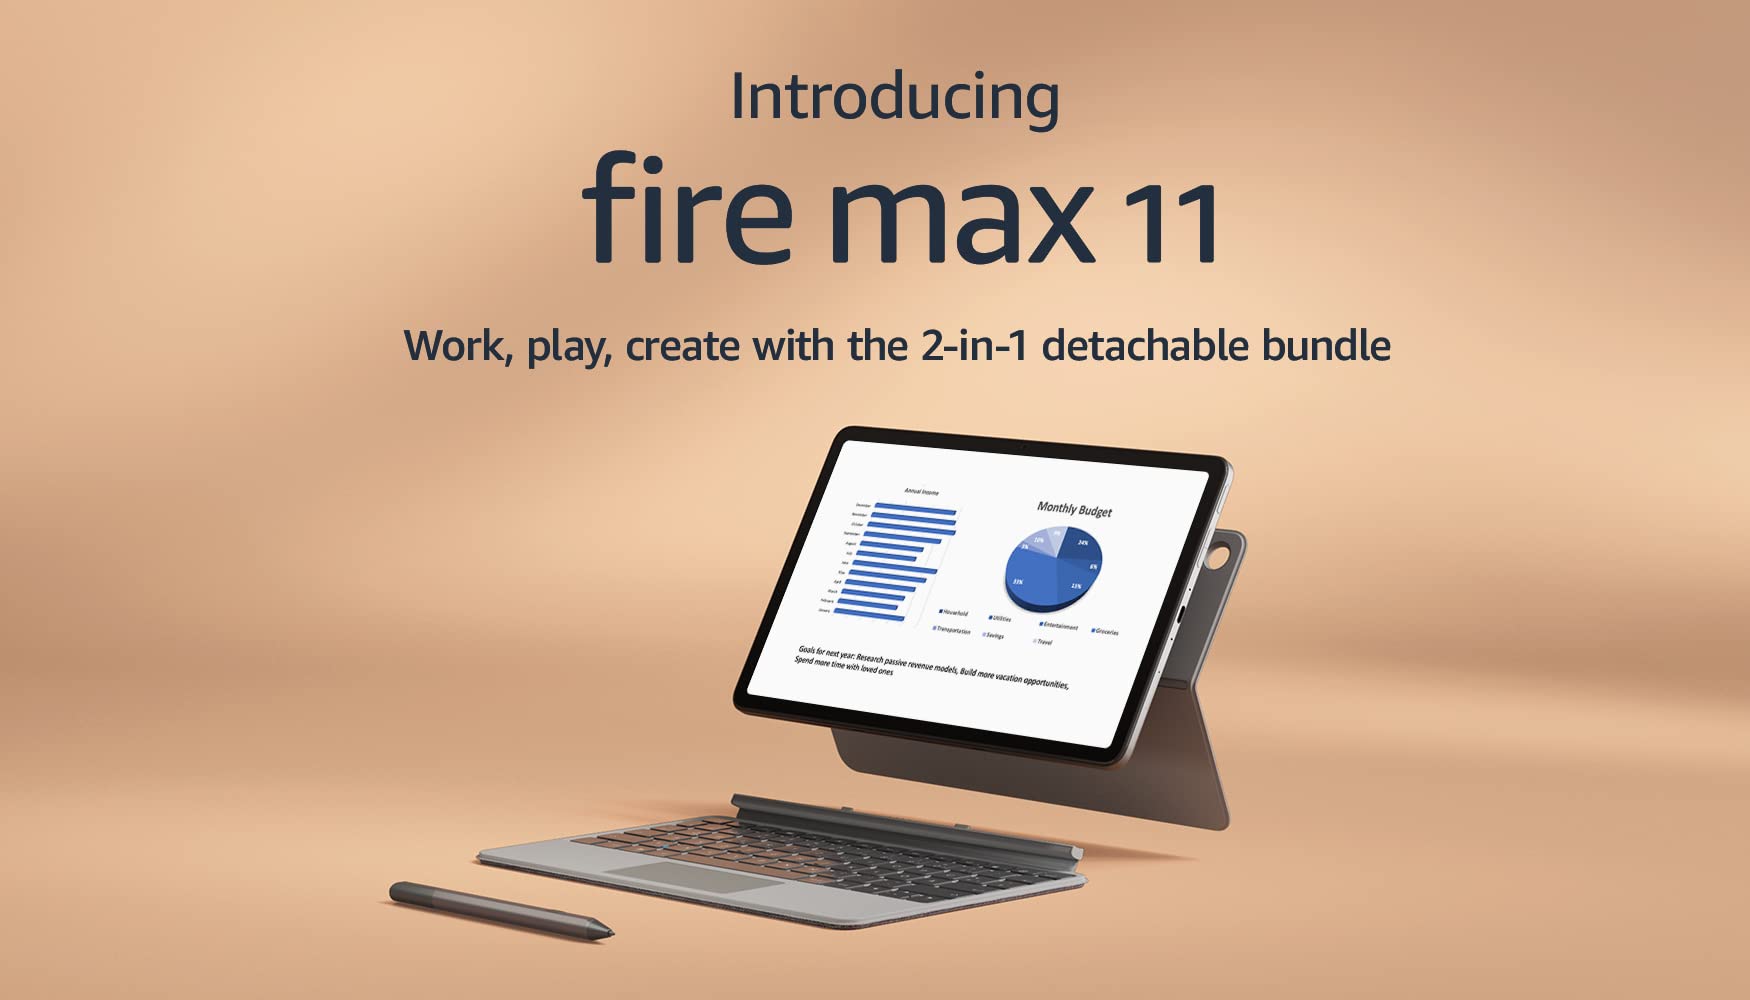 Introducing Amazon Fire Max 11 tablet productivity bundle with Keyboard Case, Stylus Pen, octa-core processor, 4 GB RAM to do more throughout your day, 64 GB, Gray